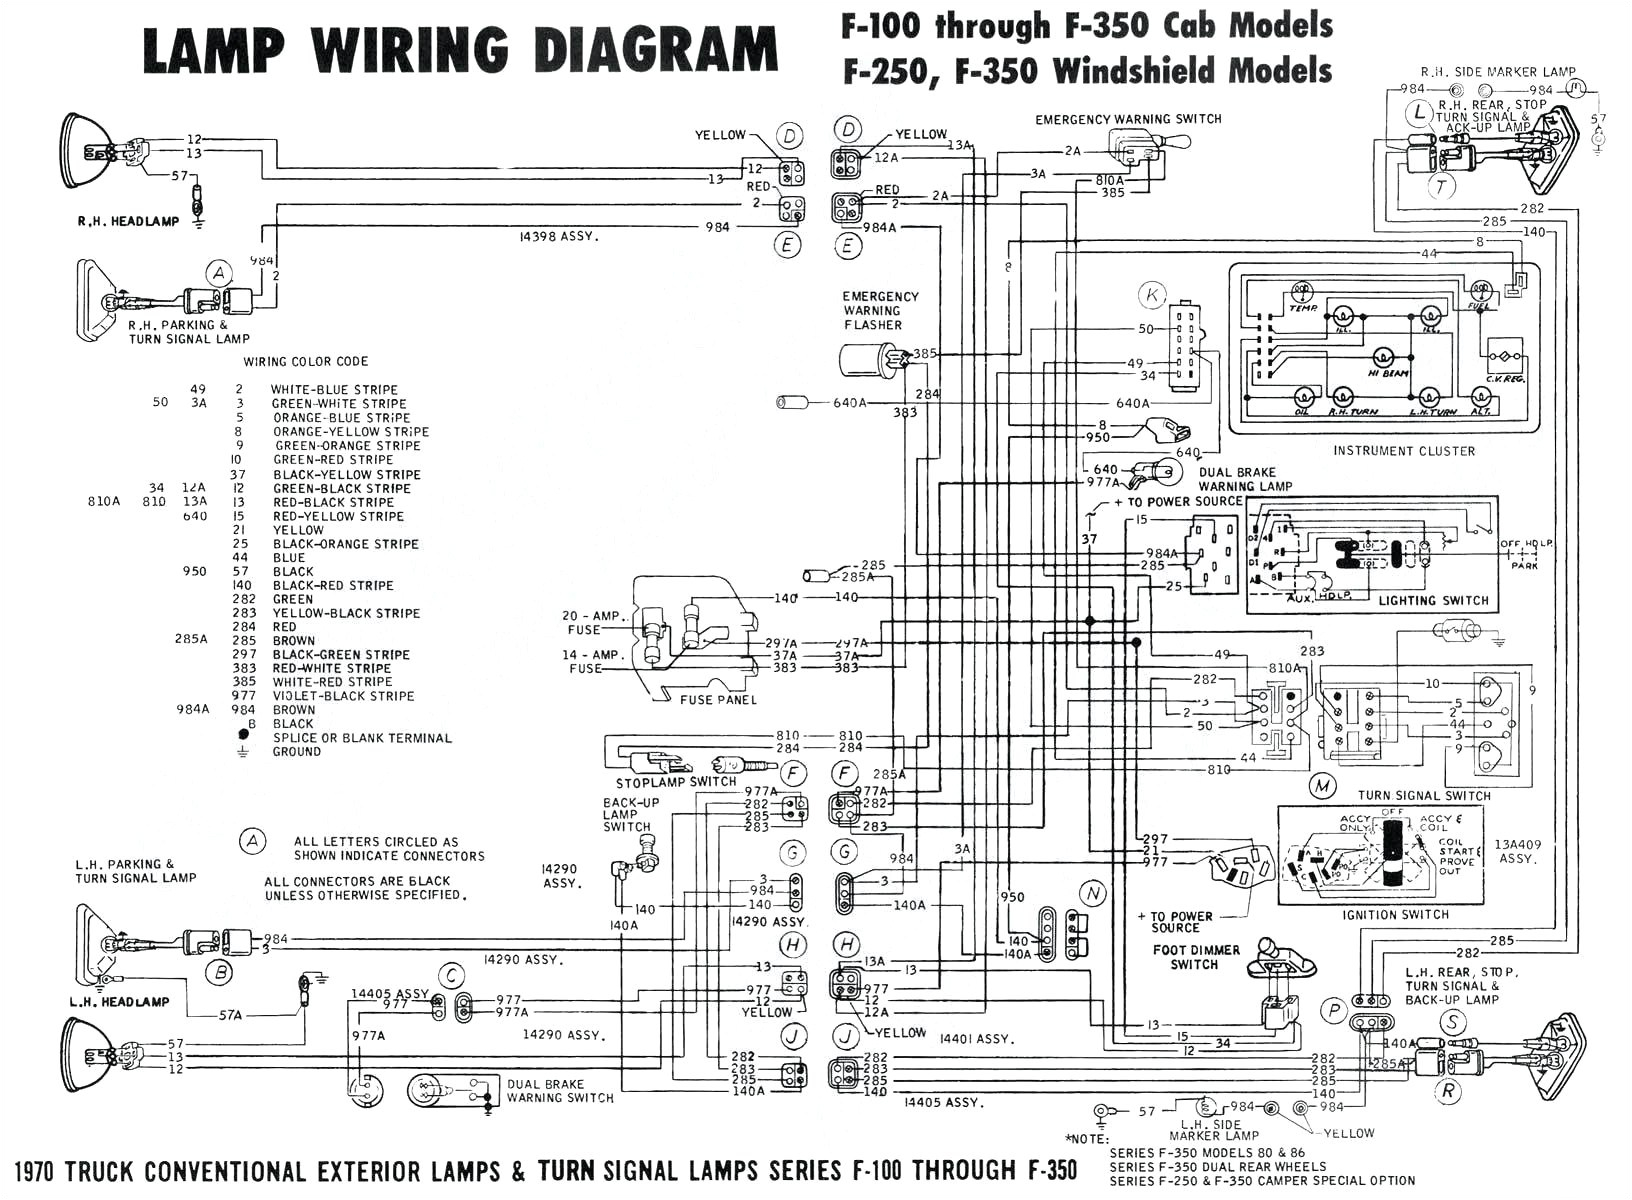 super switchquot s type wiring kit wiring diagram article gm headlight switch wiring diagram database super